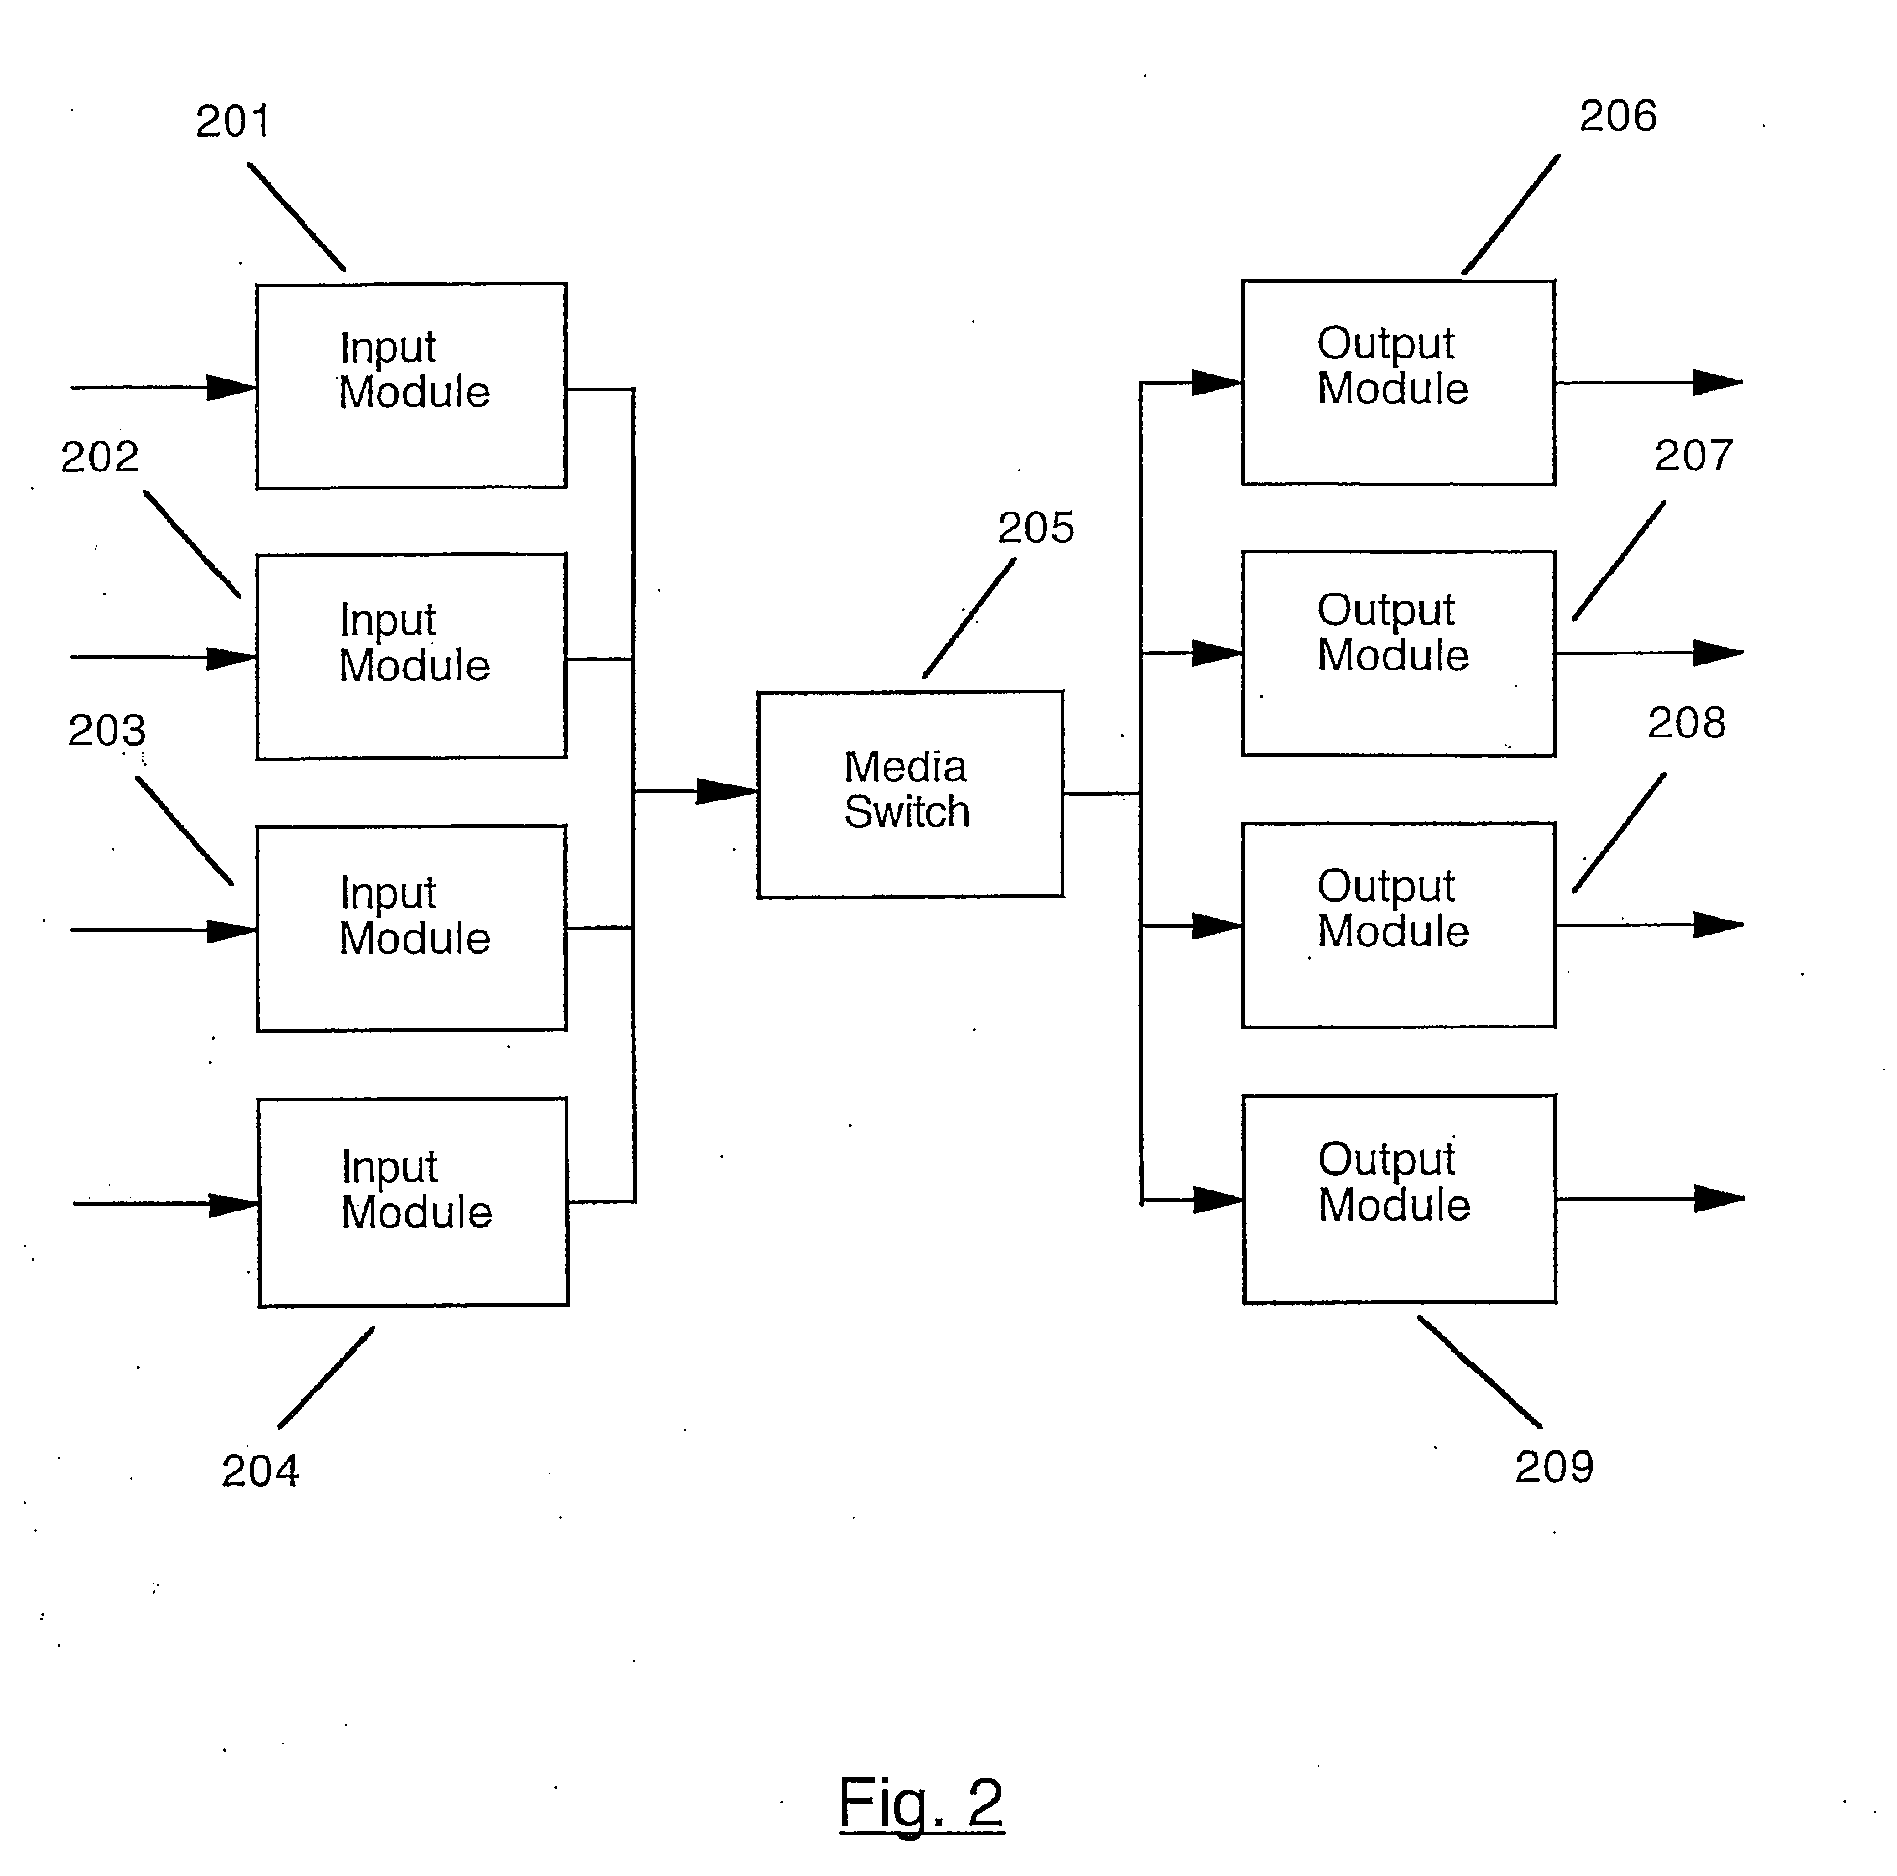 Digital video recorder system with an integrated DVD recording device